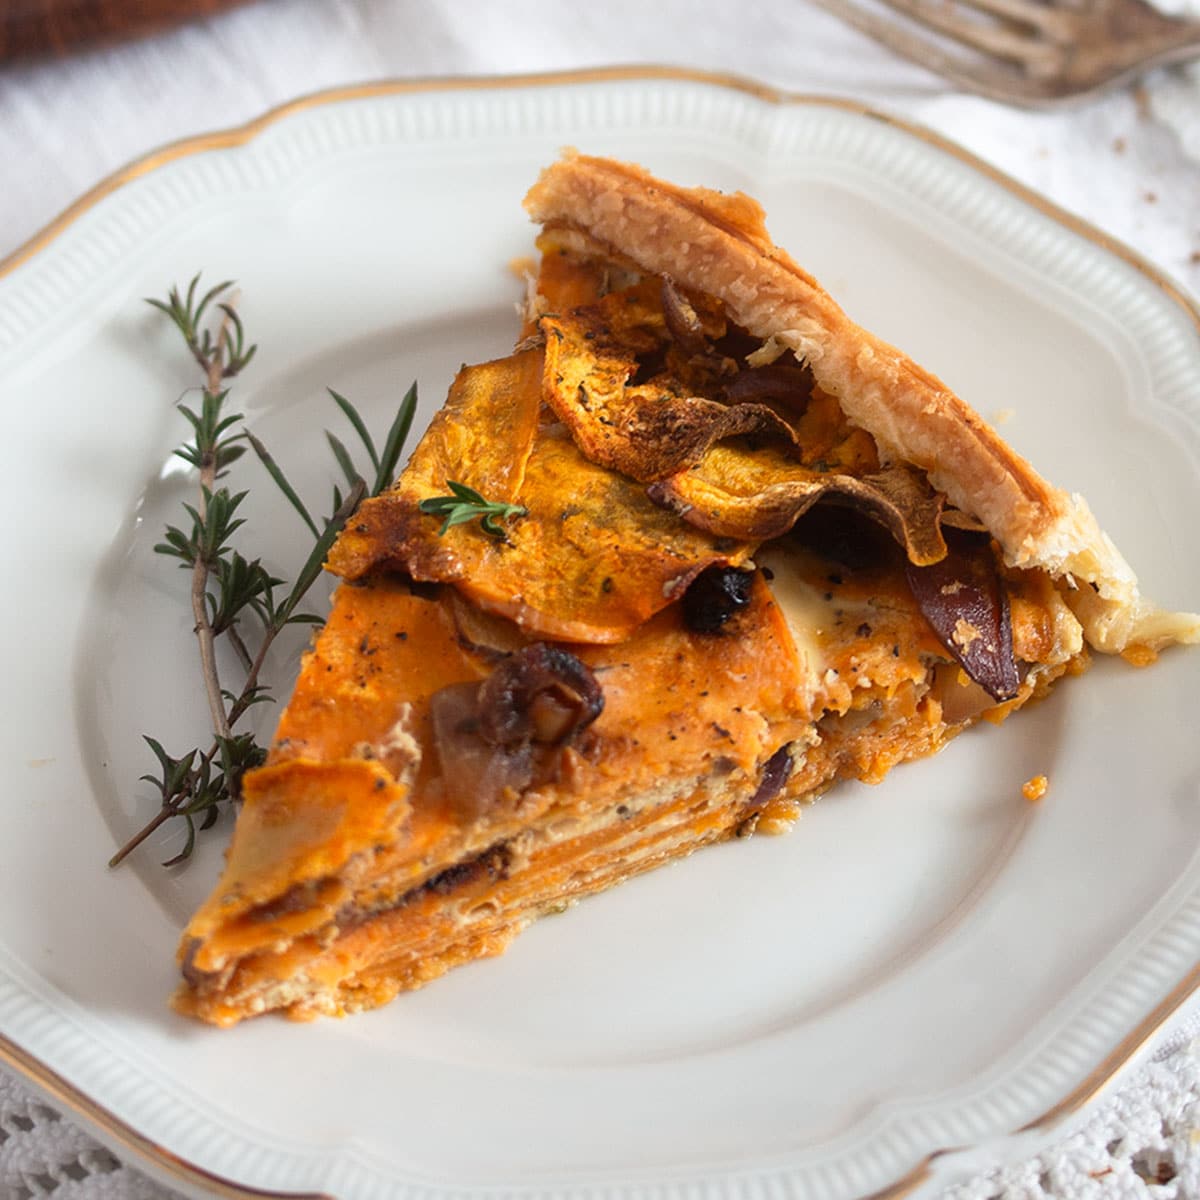 slice of savory sweet potato pie and tyhme on a plate.